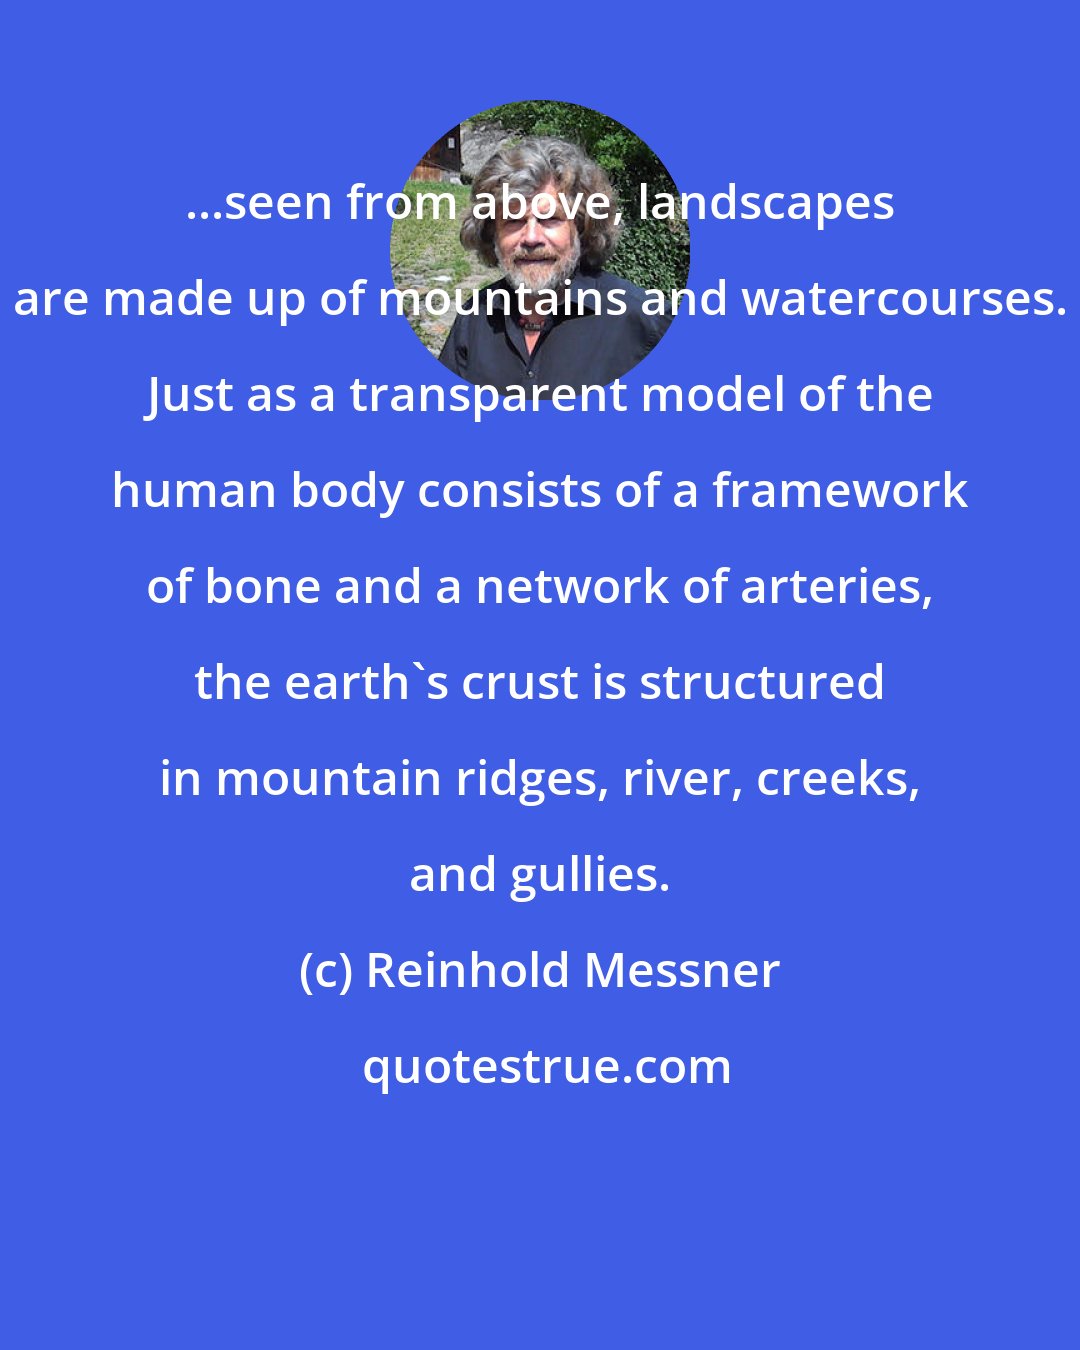 Reinhold Messner: ...seen from above, landscapes are made up of mountains and watercourses. Just as a transparent model of the human body consists of a framework of bone and a network of arteries, the earth's crust is structured in mountain ridges, river, creeks, and gullies.